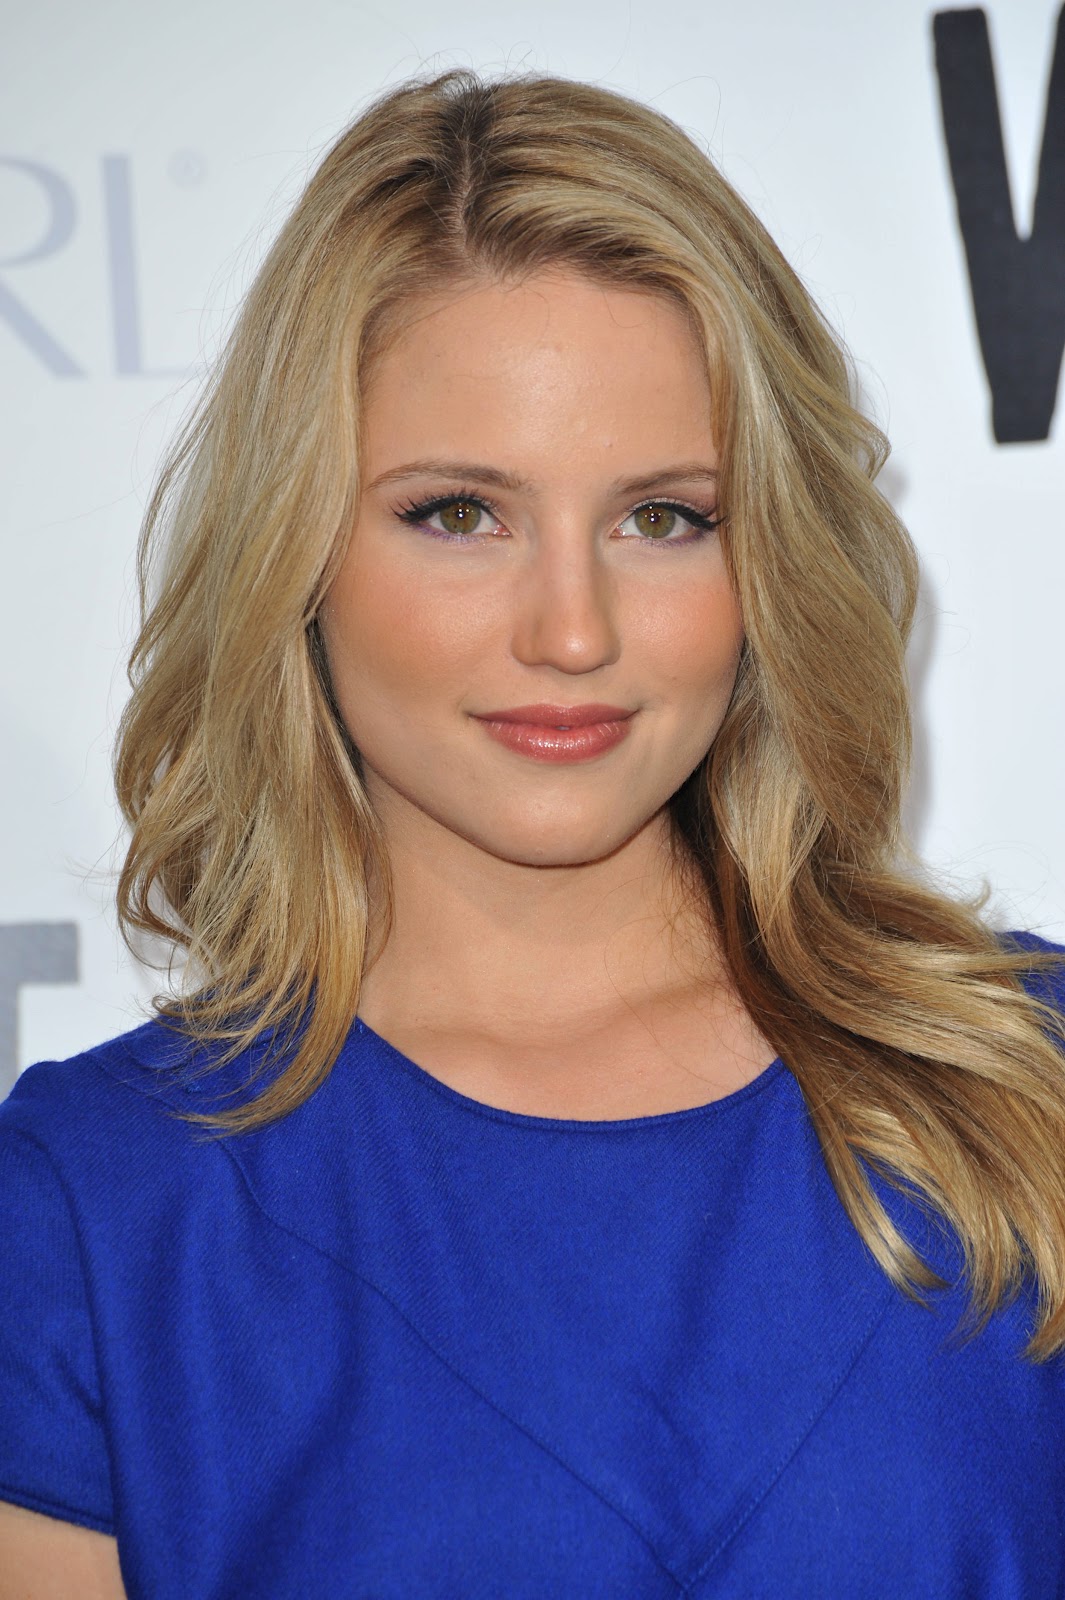 a new life hartz: Beauty of Dianna Agron American Actress, Singer with her Different Haircuts